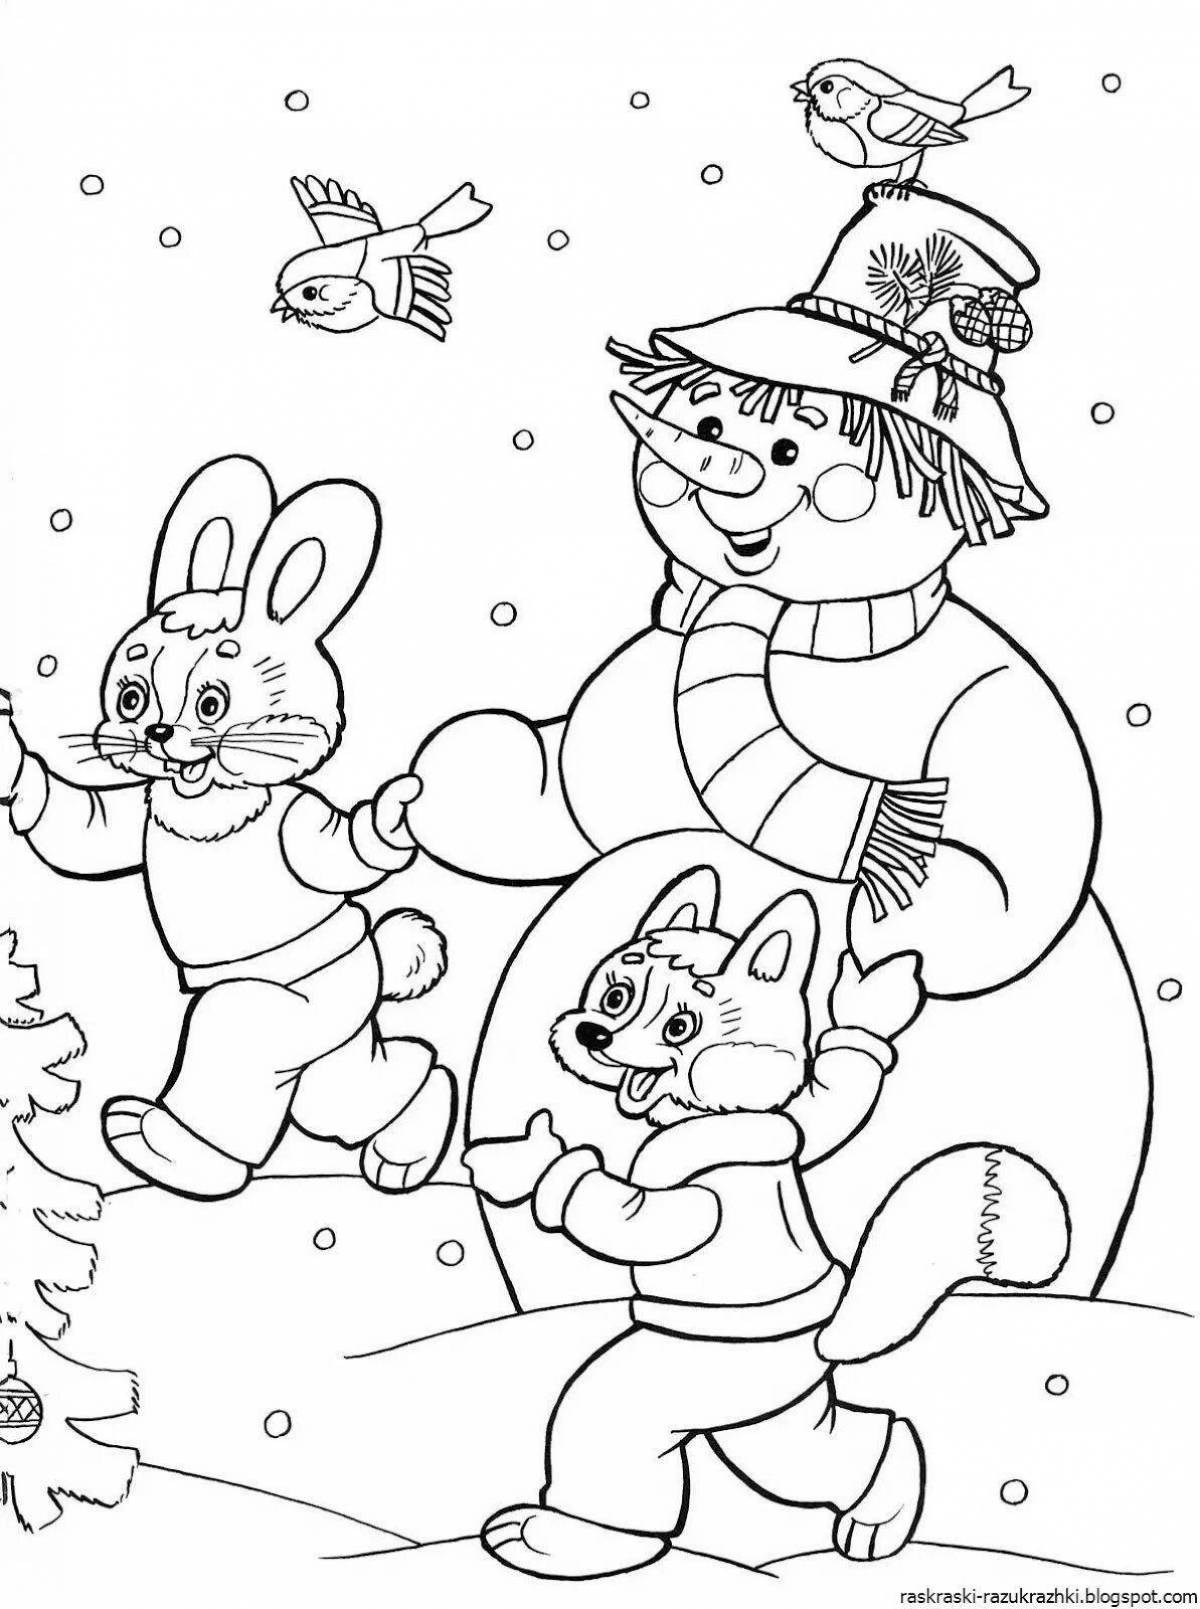 Exotic animal coloring pages in winter